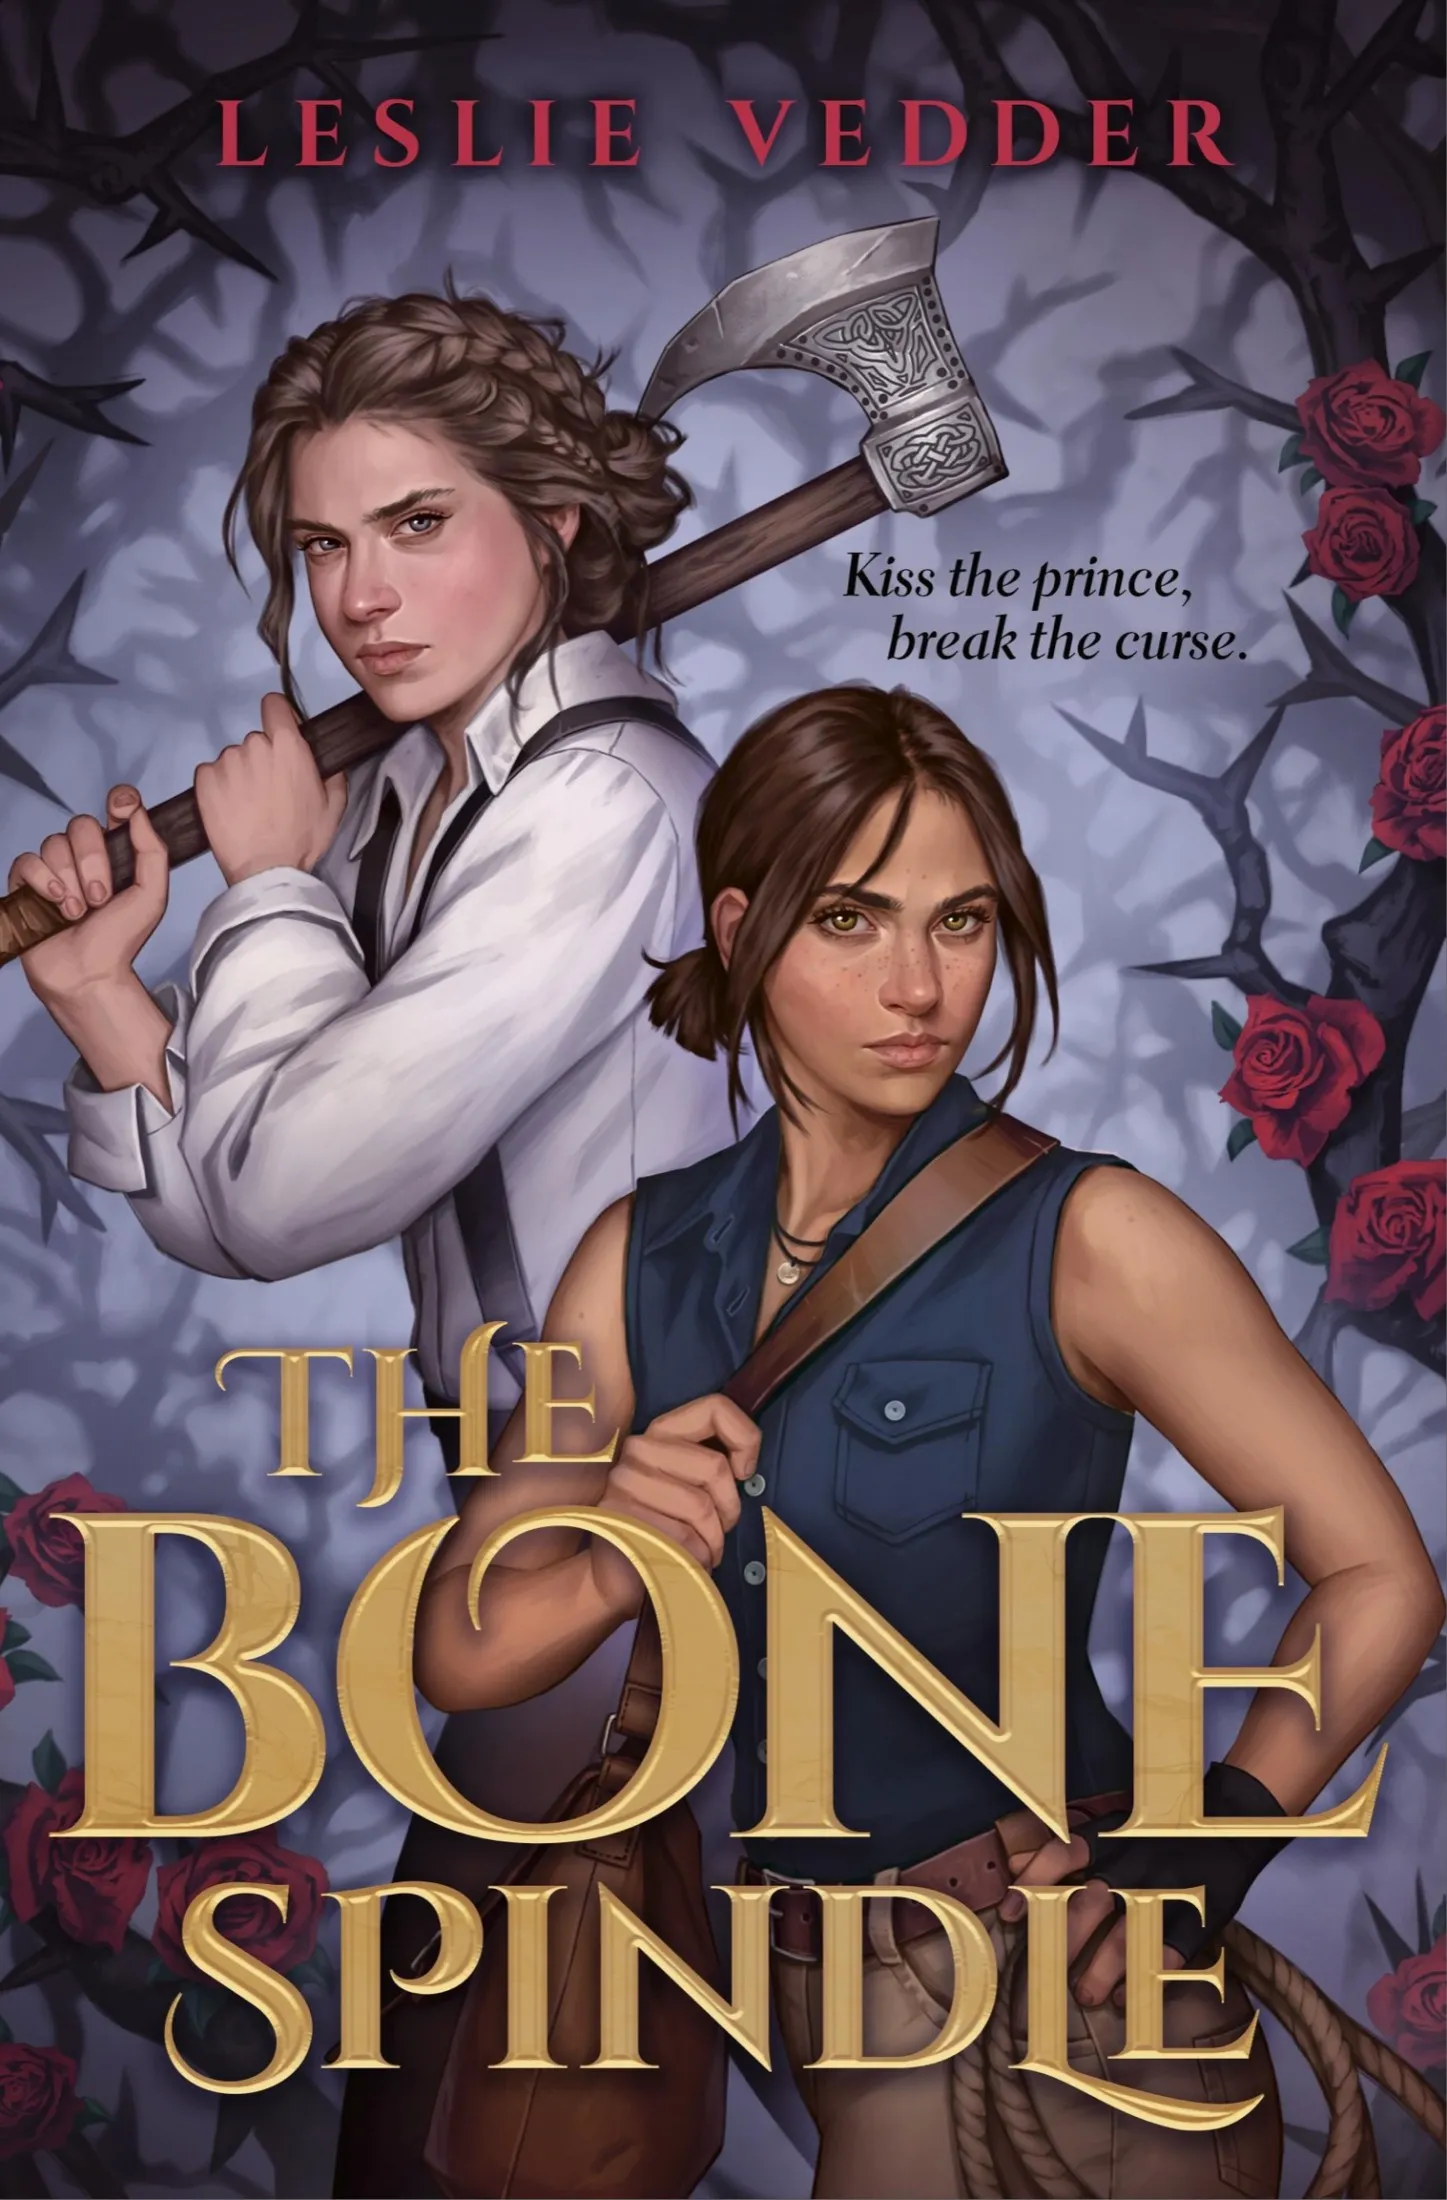 The Bone Spindle (The Bone Spindle #1)